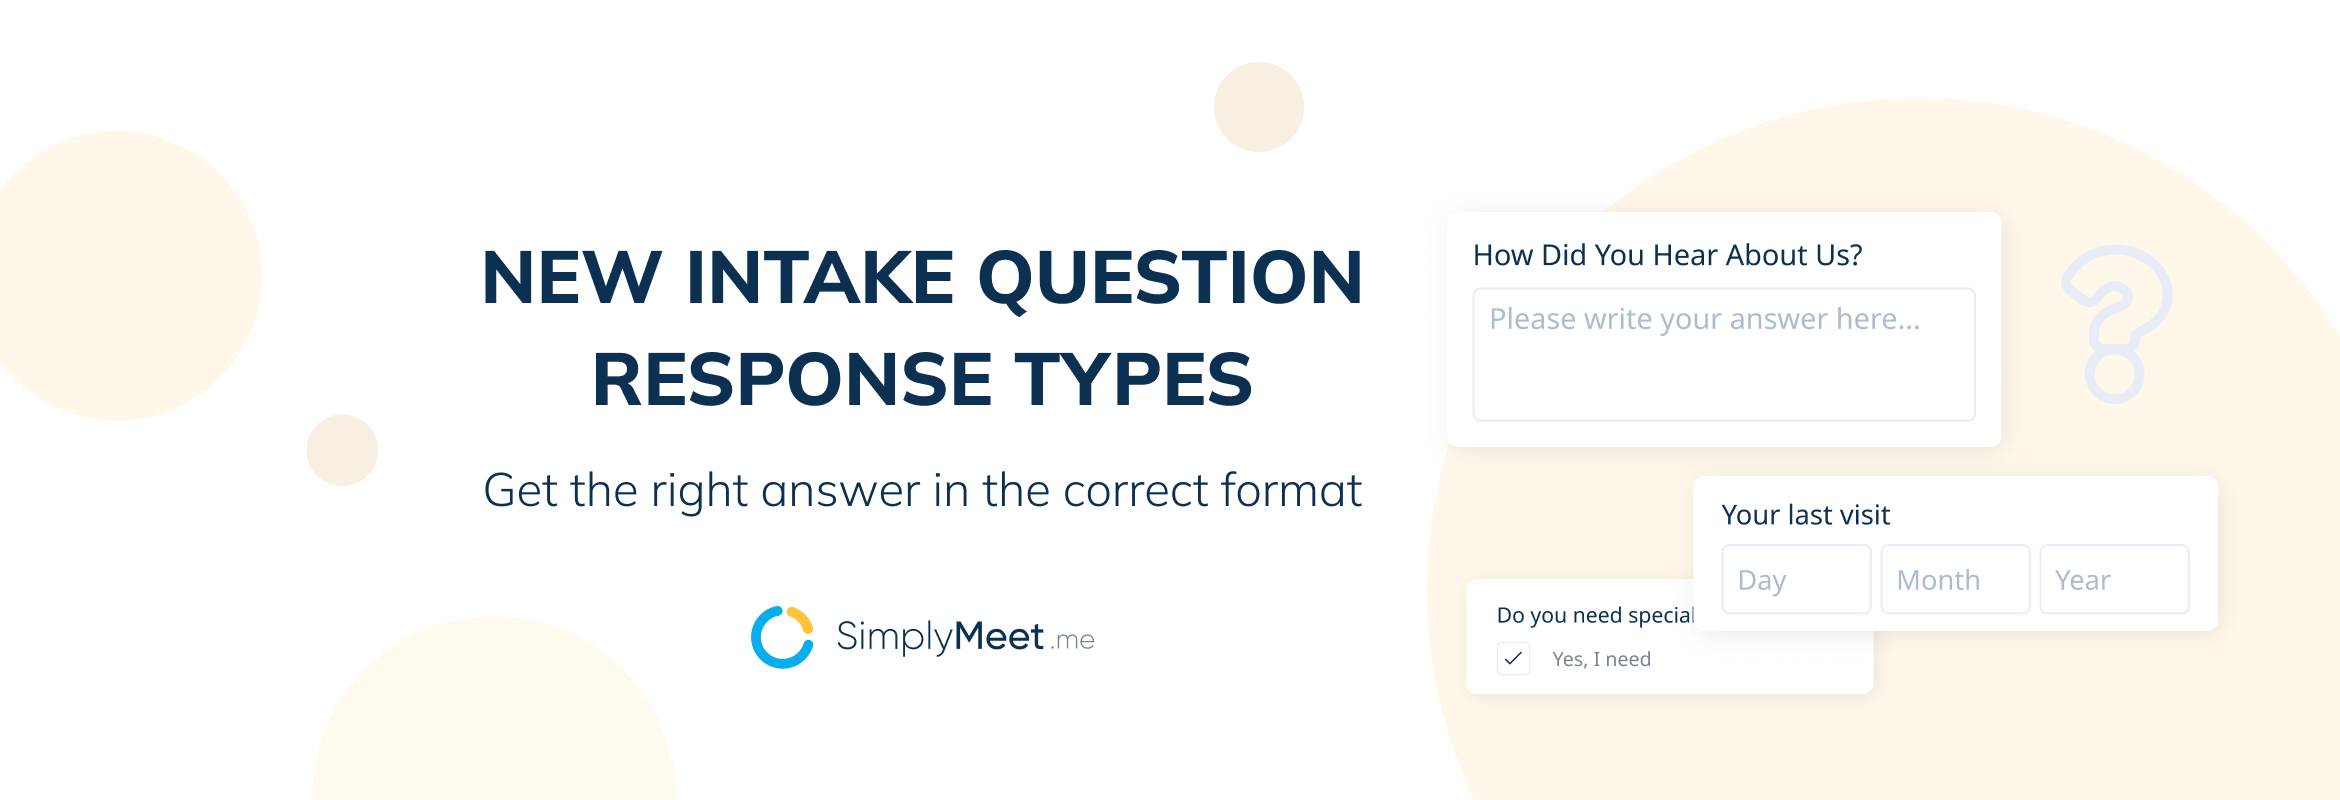 New Intake Question Response Types